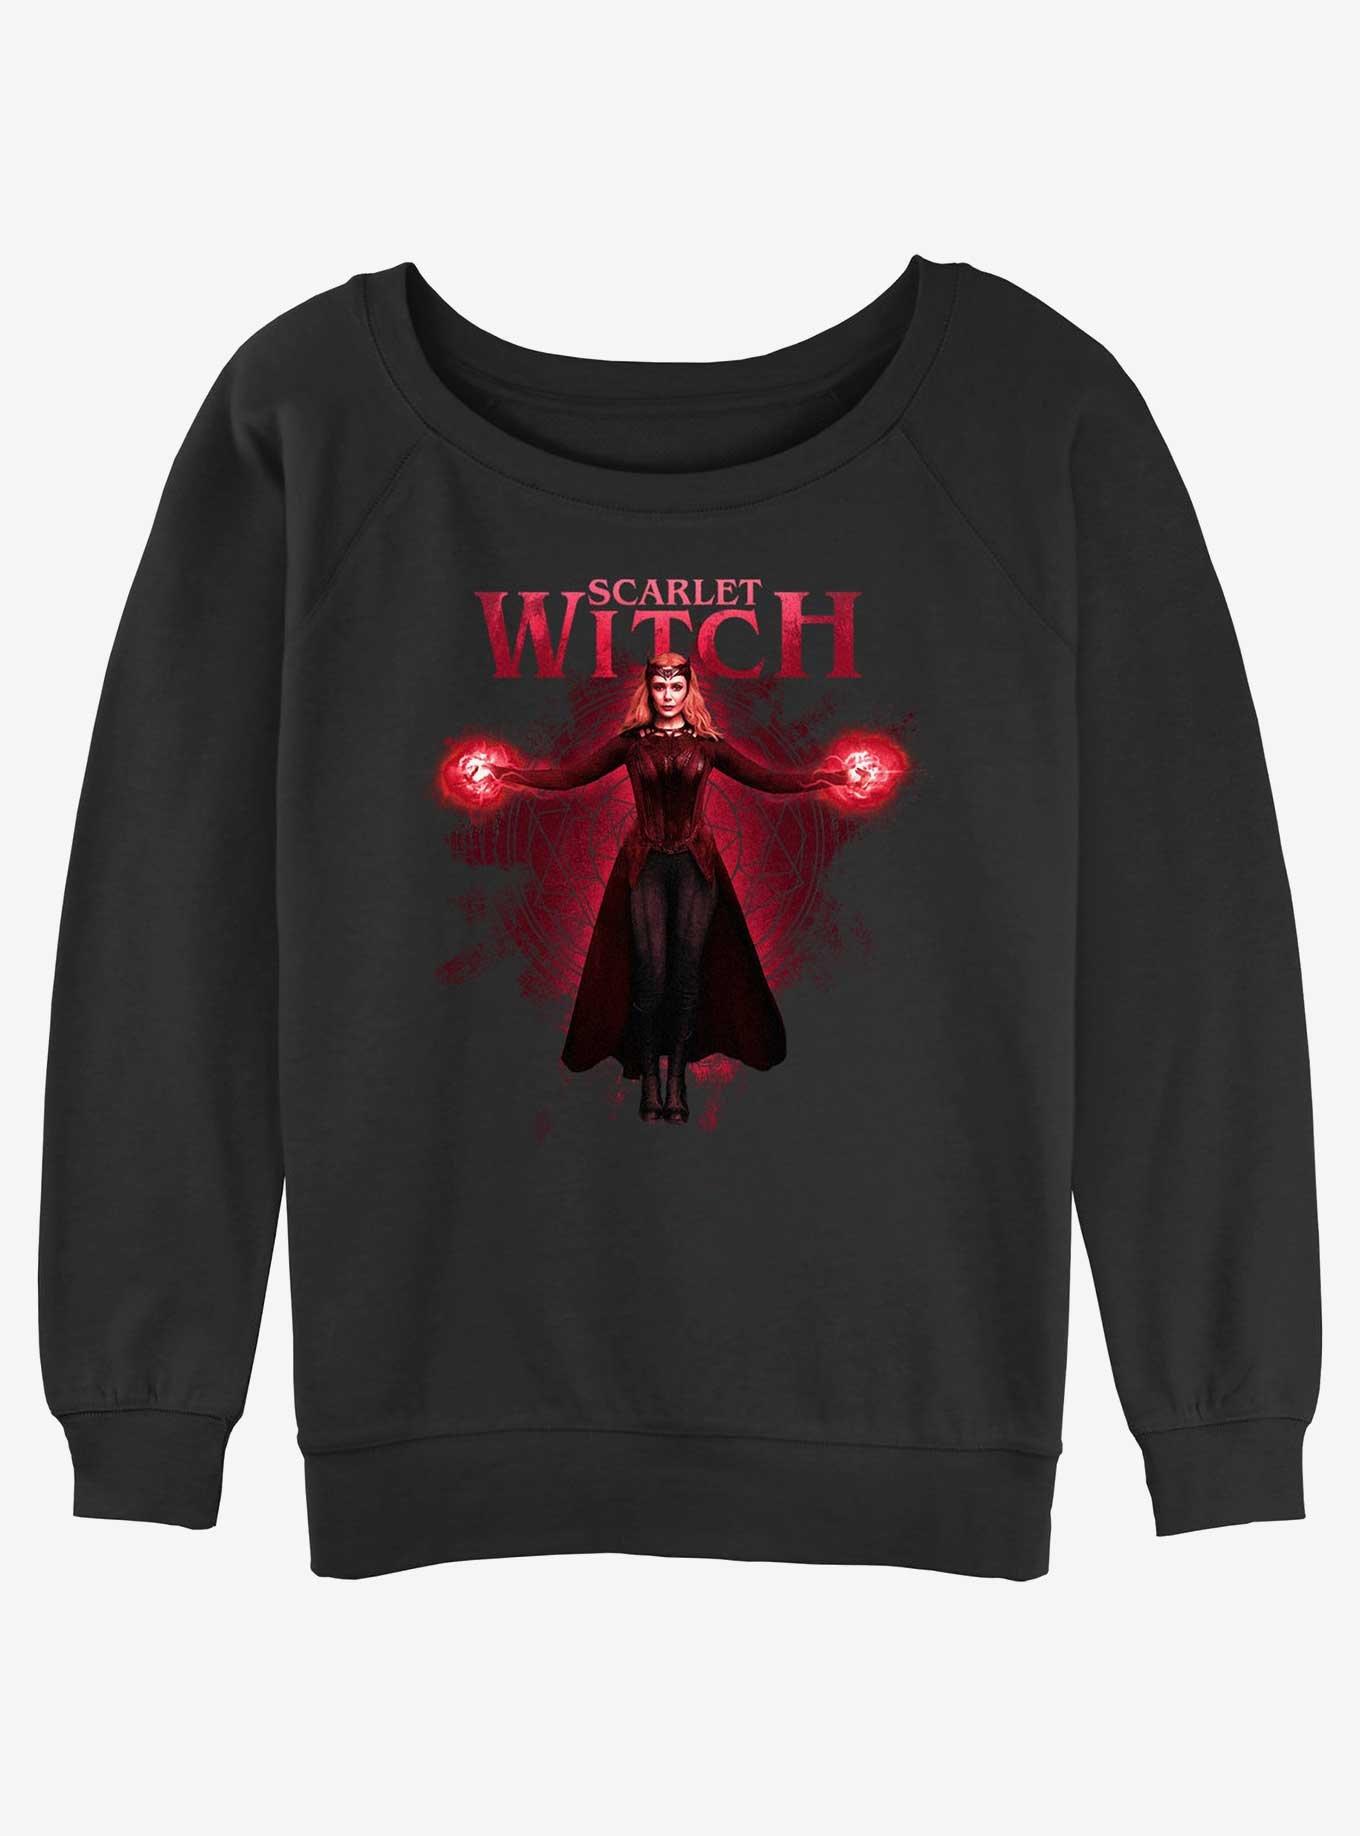 Marvel Doctor Strange in the Multiverse of Madness Scarlet Witch Rise Girls Slouchy Sweatshirt, BLACK, hi-res